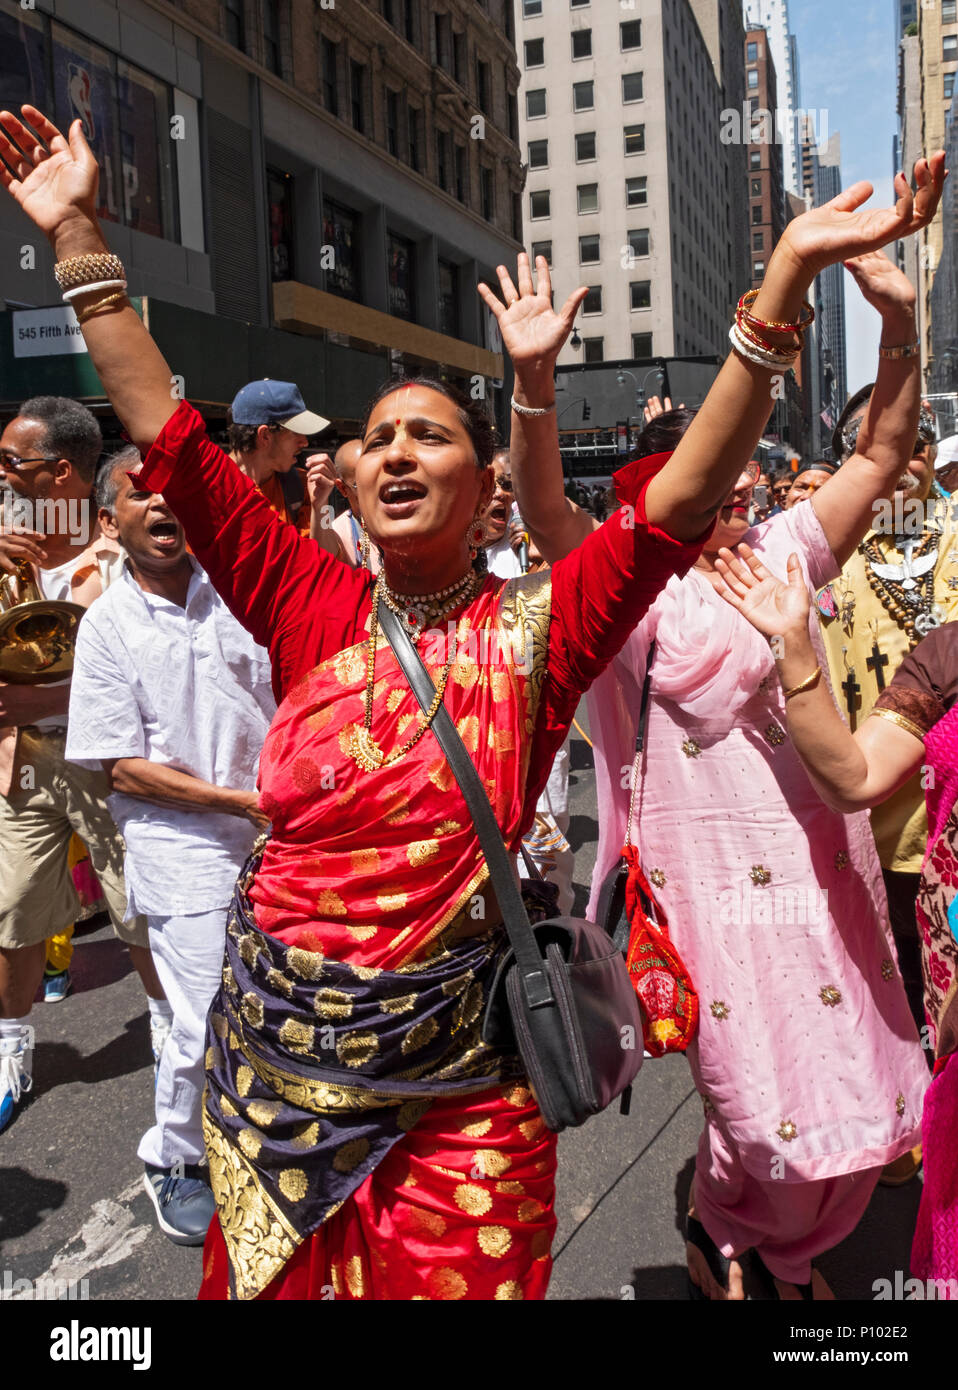 A woman in a colorful sari chanting at the Rathayatra chariot festival and parade in Midtown Manhattan, New York City. Stock Photo